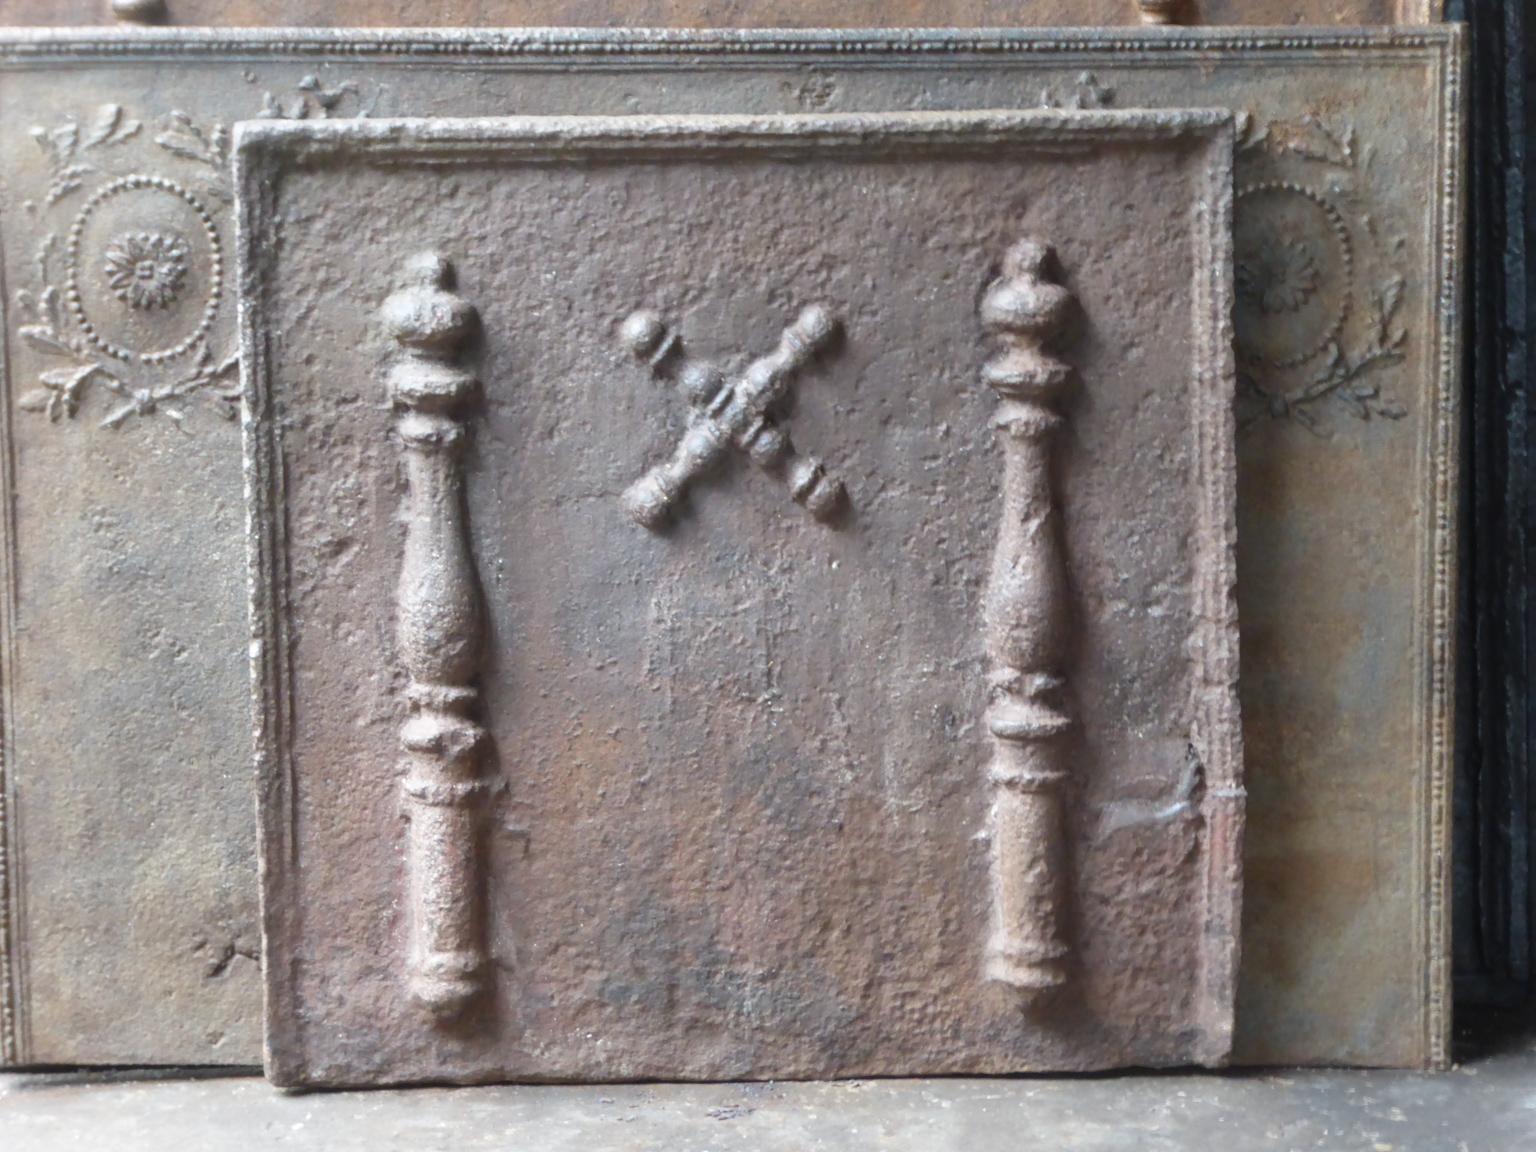 Beautiful 17th-18th century French fireback with a Saint Andrew's cross and two pillars of Hercules. Saint Andrew is said to have been martyred on a cross in this shape. The cross is since then a sign for humility and sacrifice. The pillars of